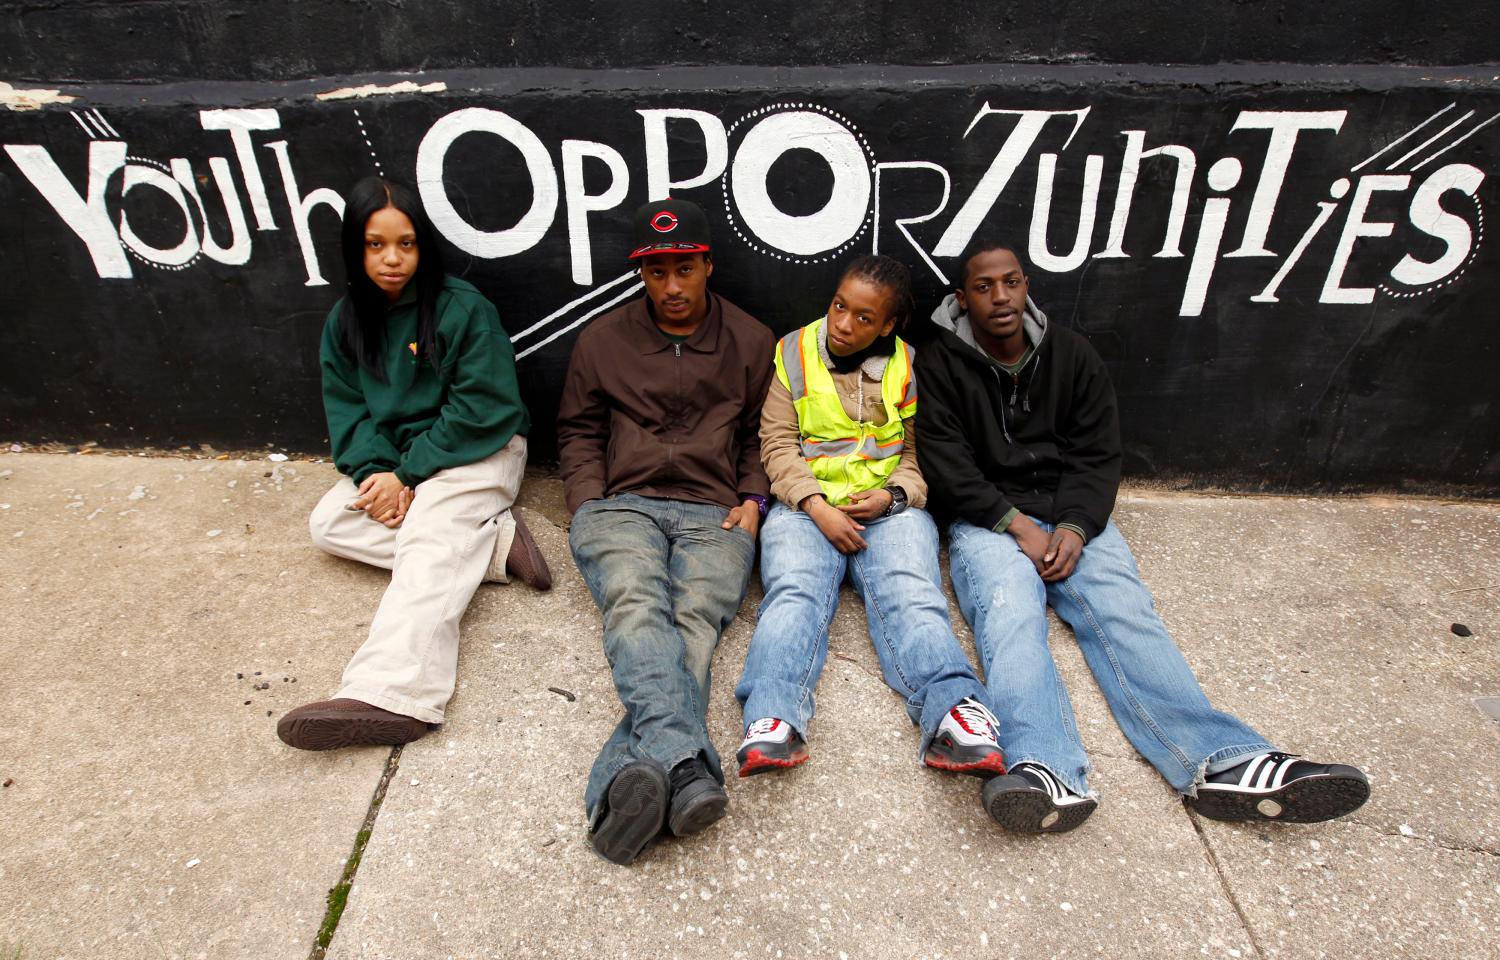 Youth Opportunity (YO!) Academy studens (L-R) Samira Gardner, Ray Allan, Rashia Gerald and Khaalid Brooks sit in front of a wall at the Westside Youth Opportunity Center in Baltimore March 9, 2011. The 15 percent unemployment rate for 20- to 24-year-olds in March was more than double the rate for those over age 55, according to Labor Department data. Picture taken March 9, 2011. To match Feature AGING/CONFLICT REUTERS/Kevin Lamarque (UNITED STATES - Tags: SOCIETY EMPLOYMENT BUSINESS) - RTR2KYIB